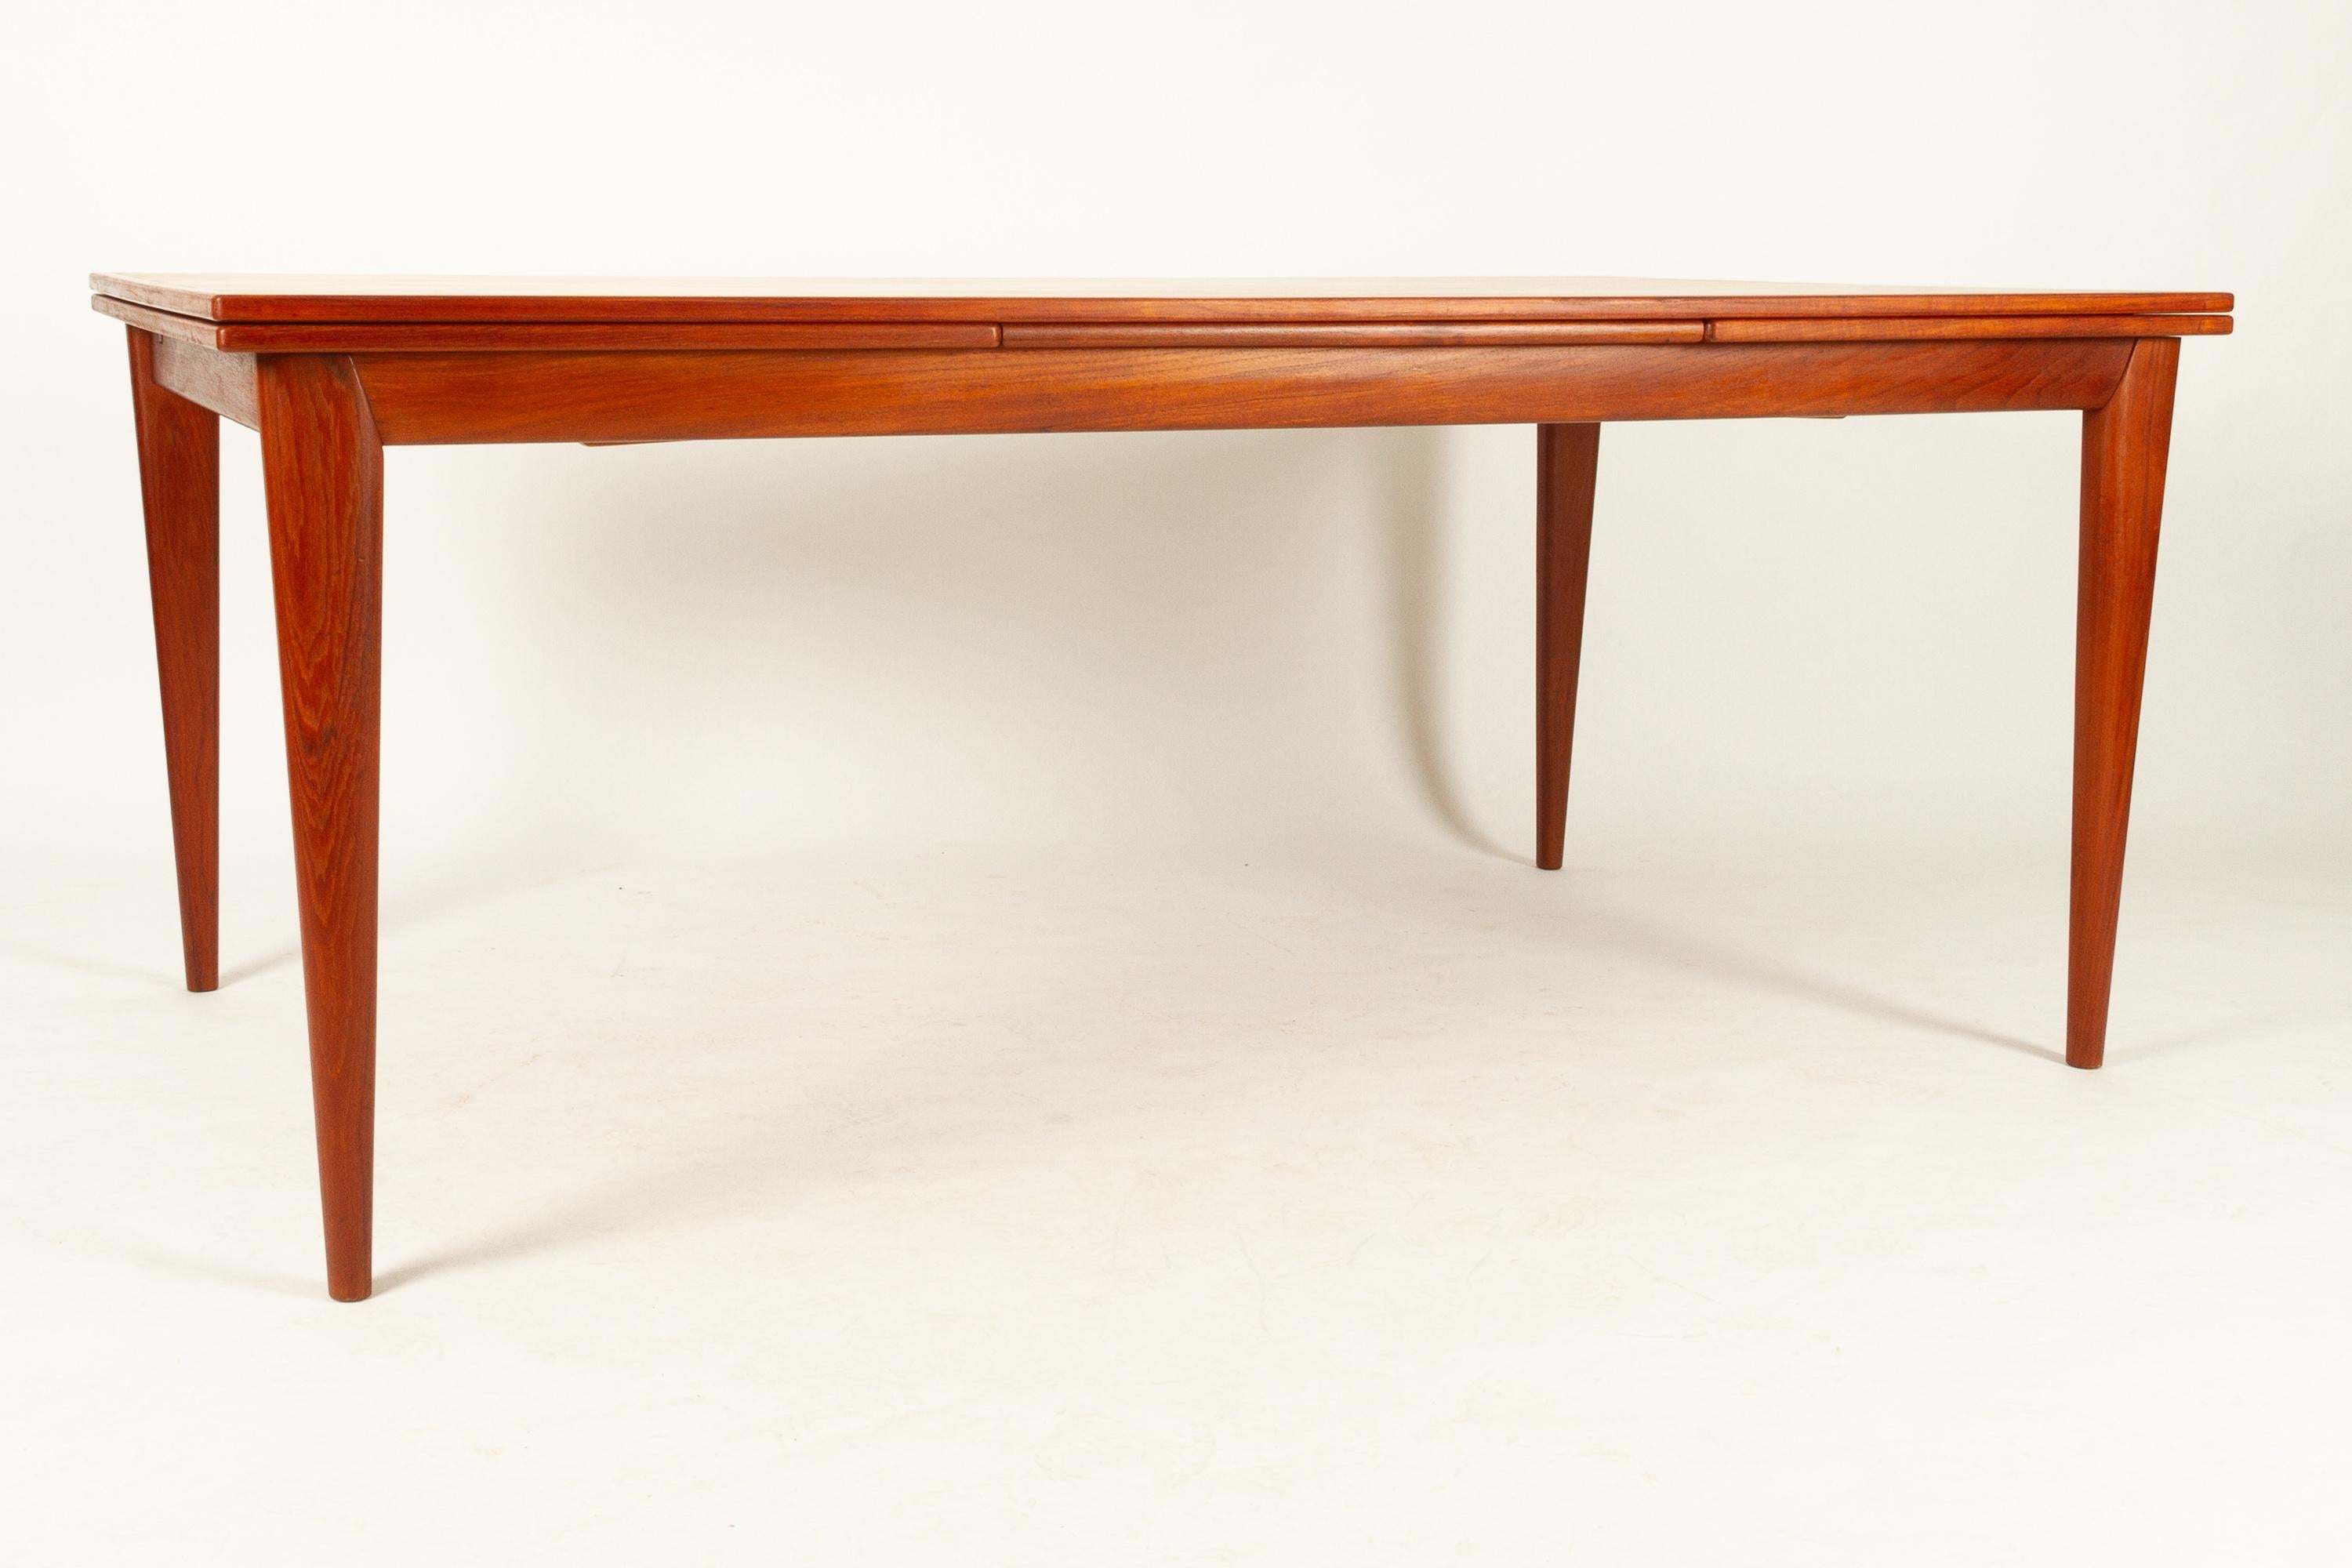 Vintage Danish large teak dining table model 254 by N.O. Møller for J.L. Møllers Møbelfabrik 1960s.
Extra large size extendable teak dining table seats up to 12/14 persons when extended. Extends up to 296 cm / 9'8'' with leaves drawn out. Easy for